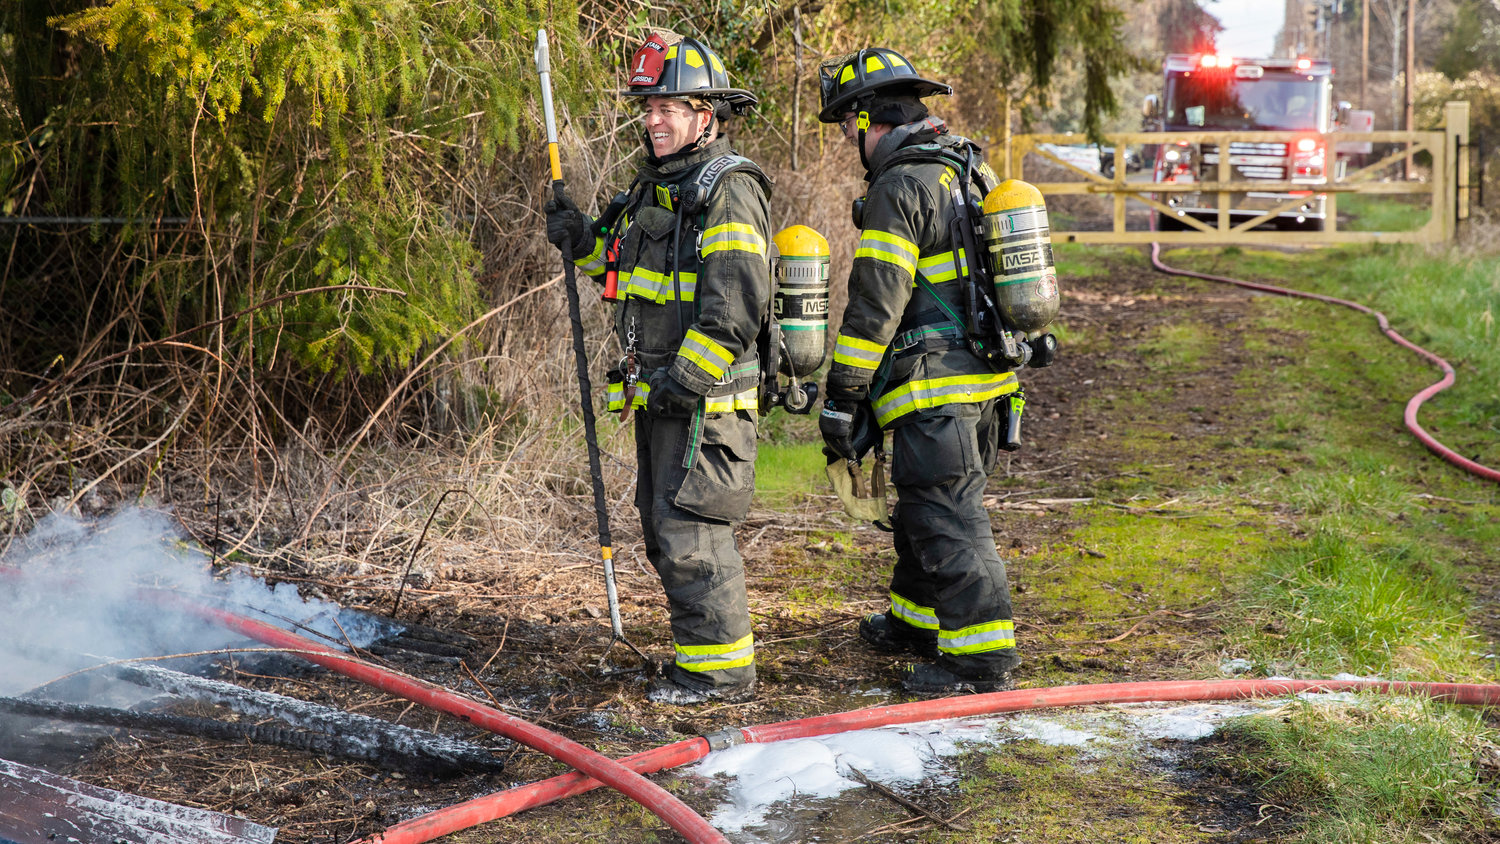 Captain Casey McCarthy, with Riverside Fire Authority, smiles after flames were controlled at an outbuilding that was supposed to be unoccupied along Long Road in Centralia Thursday morning.